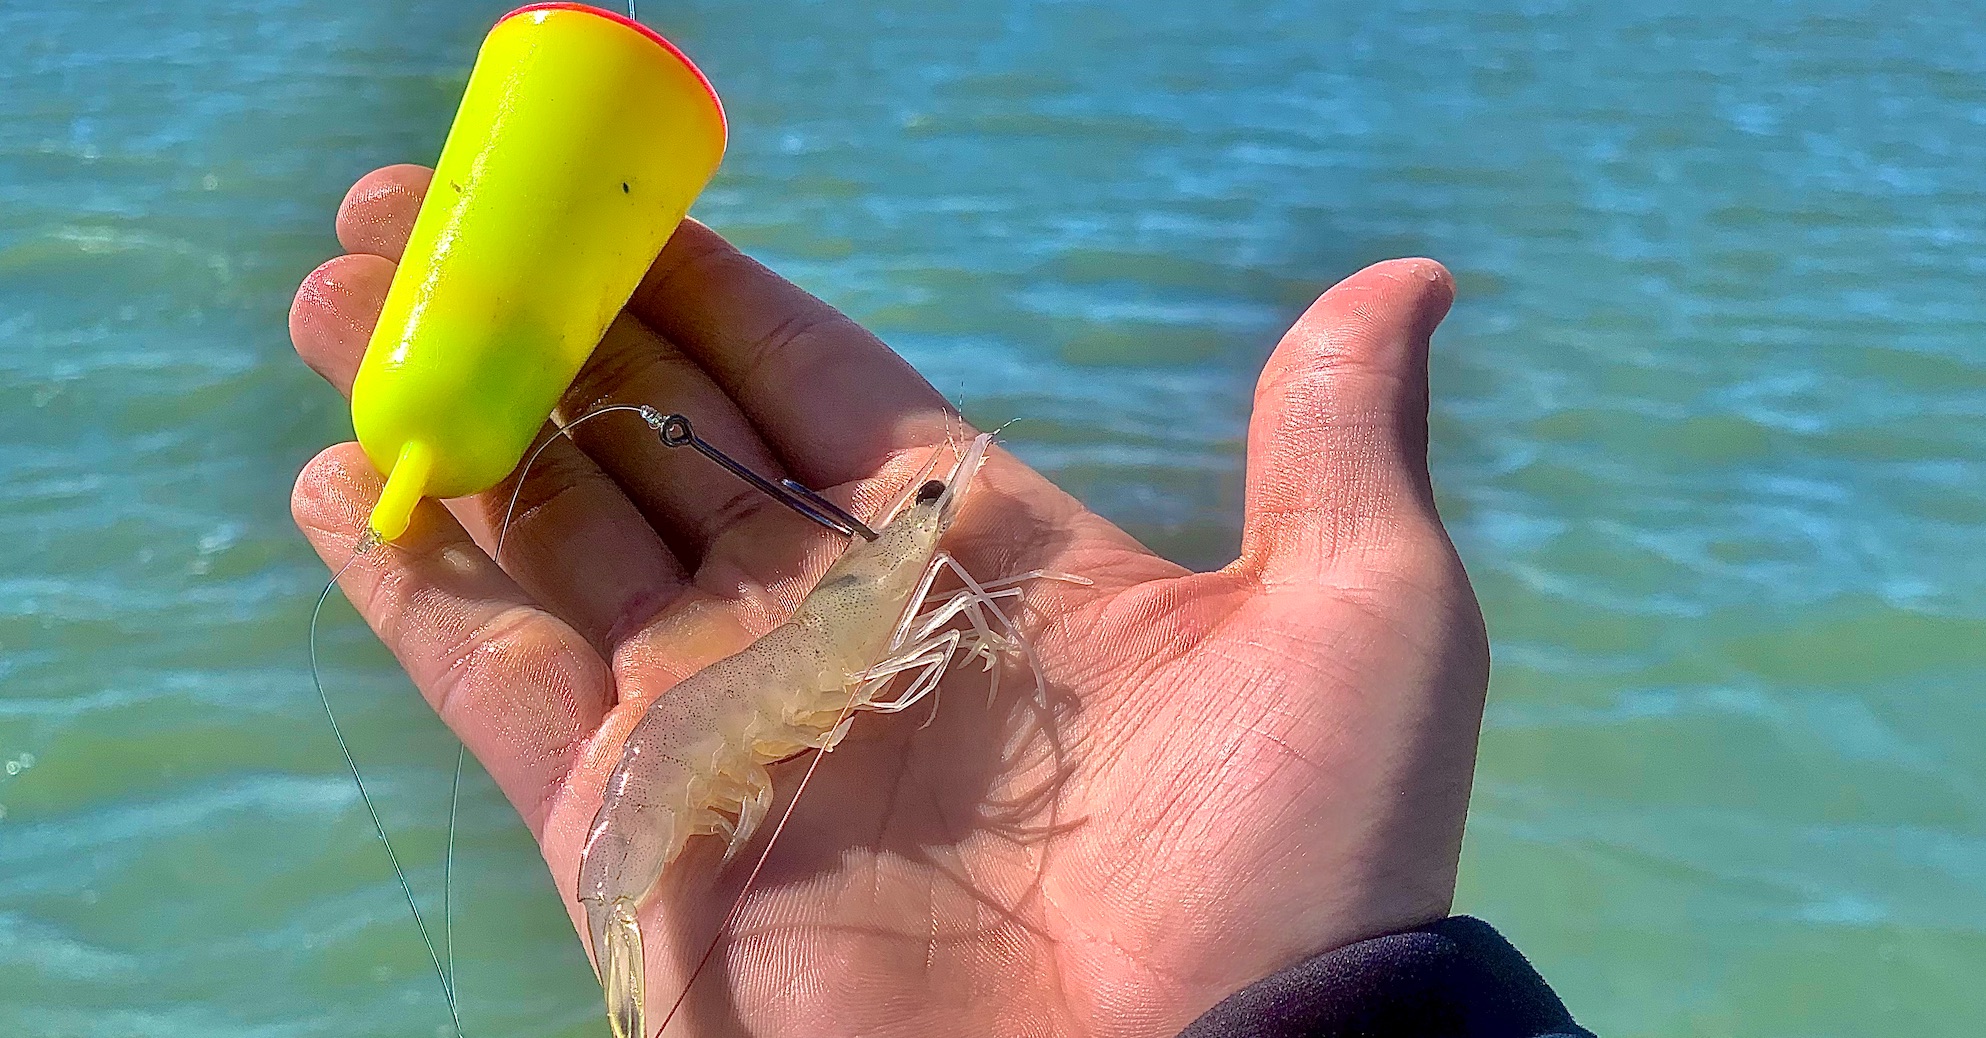 How To Use Live Shrimp In The Shallows On Windy Days » Salt Strong